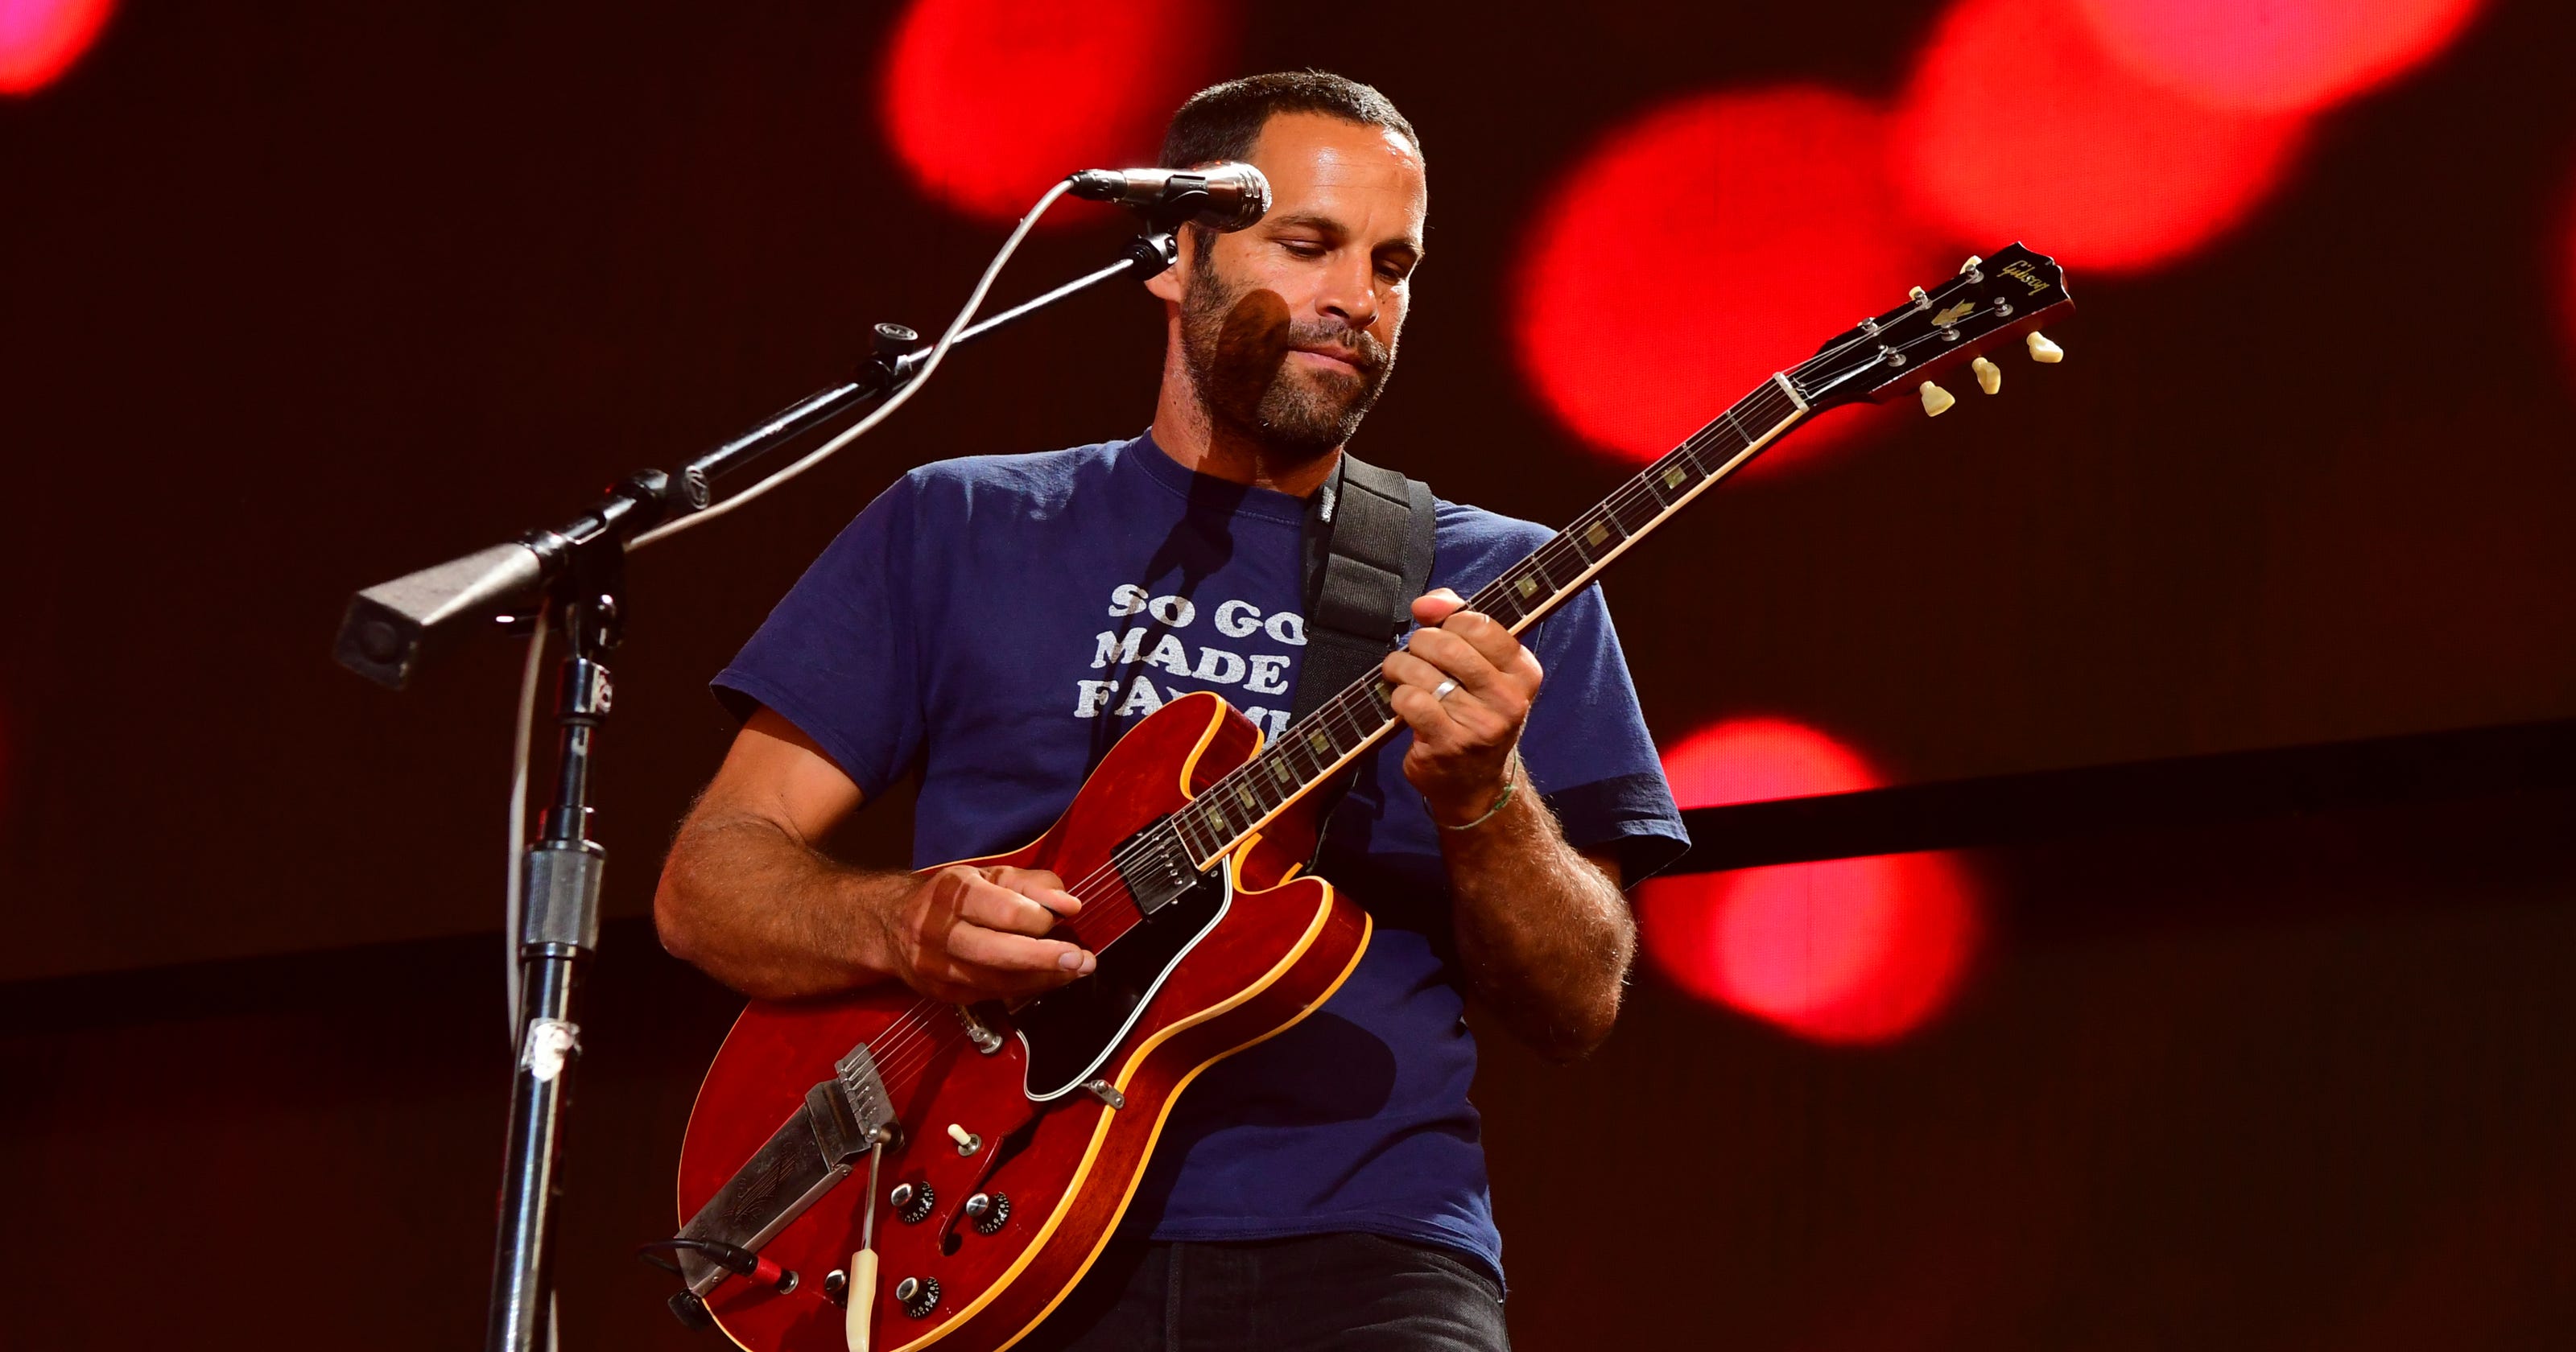 Jack Johnson returns to Indy with a sustainable tour